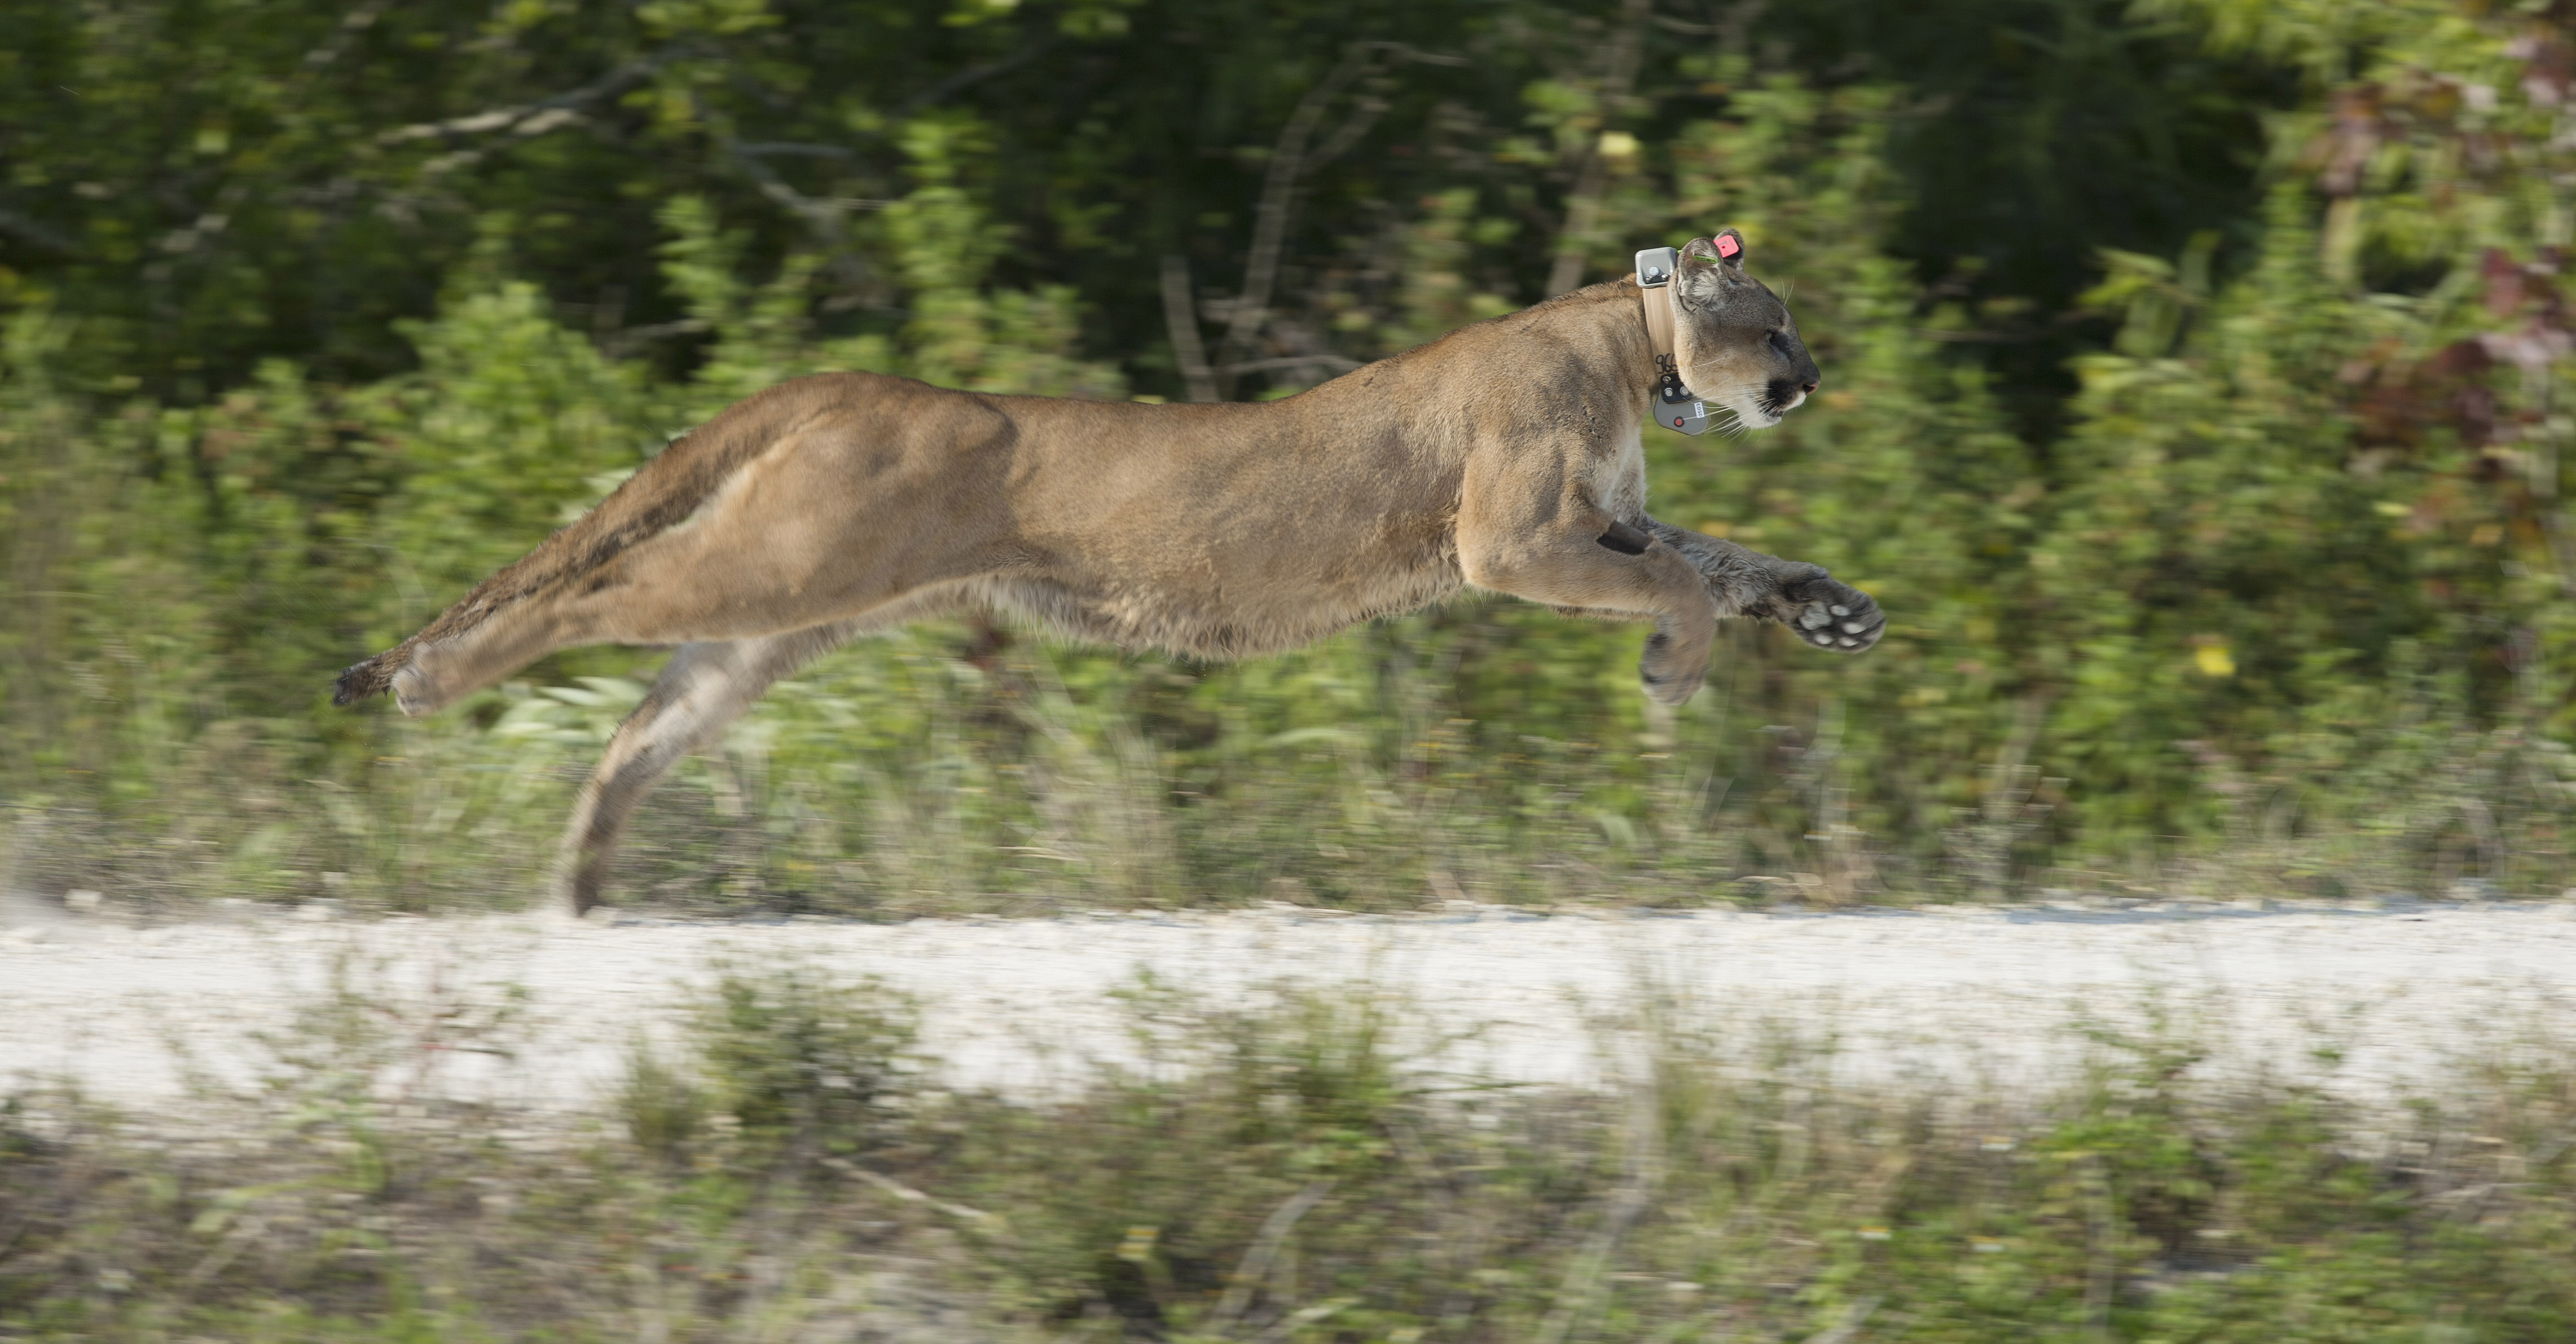 Endangered Florida Panther Struck, Killed By Vehicle In Collier County